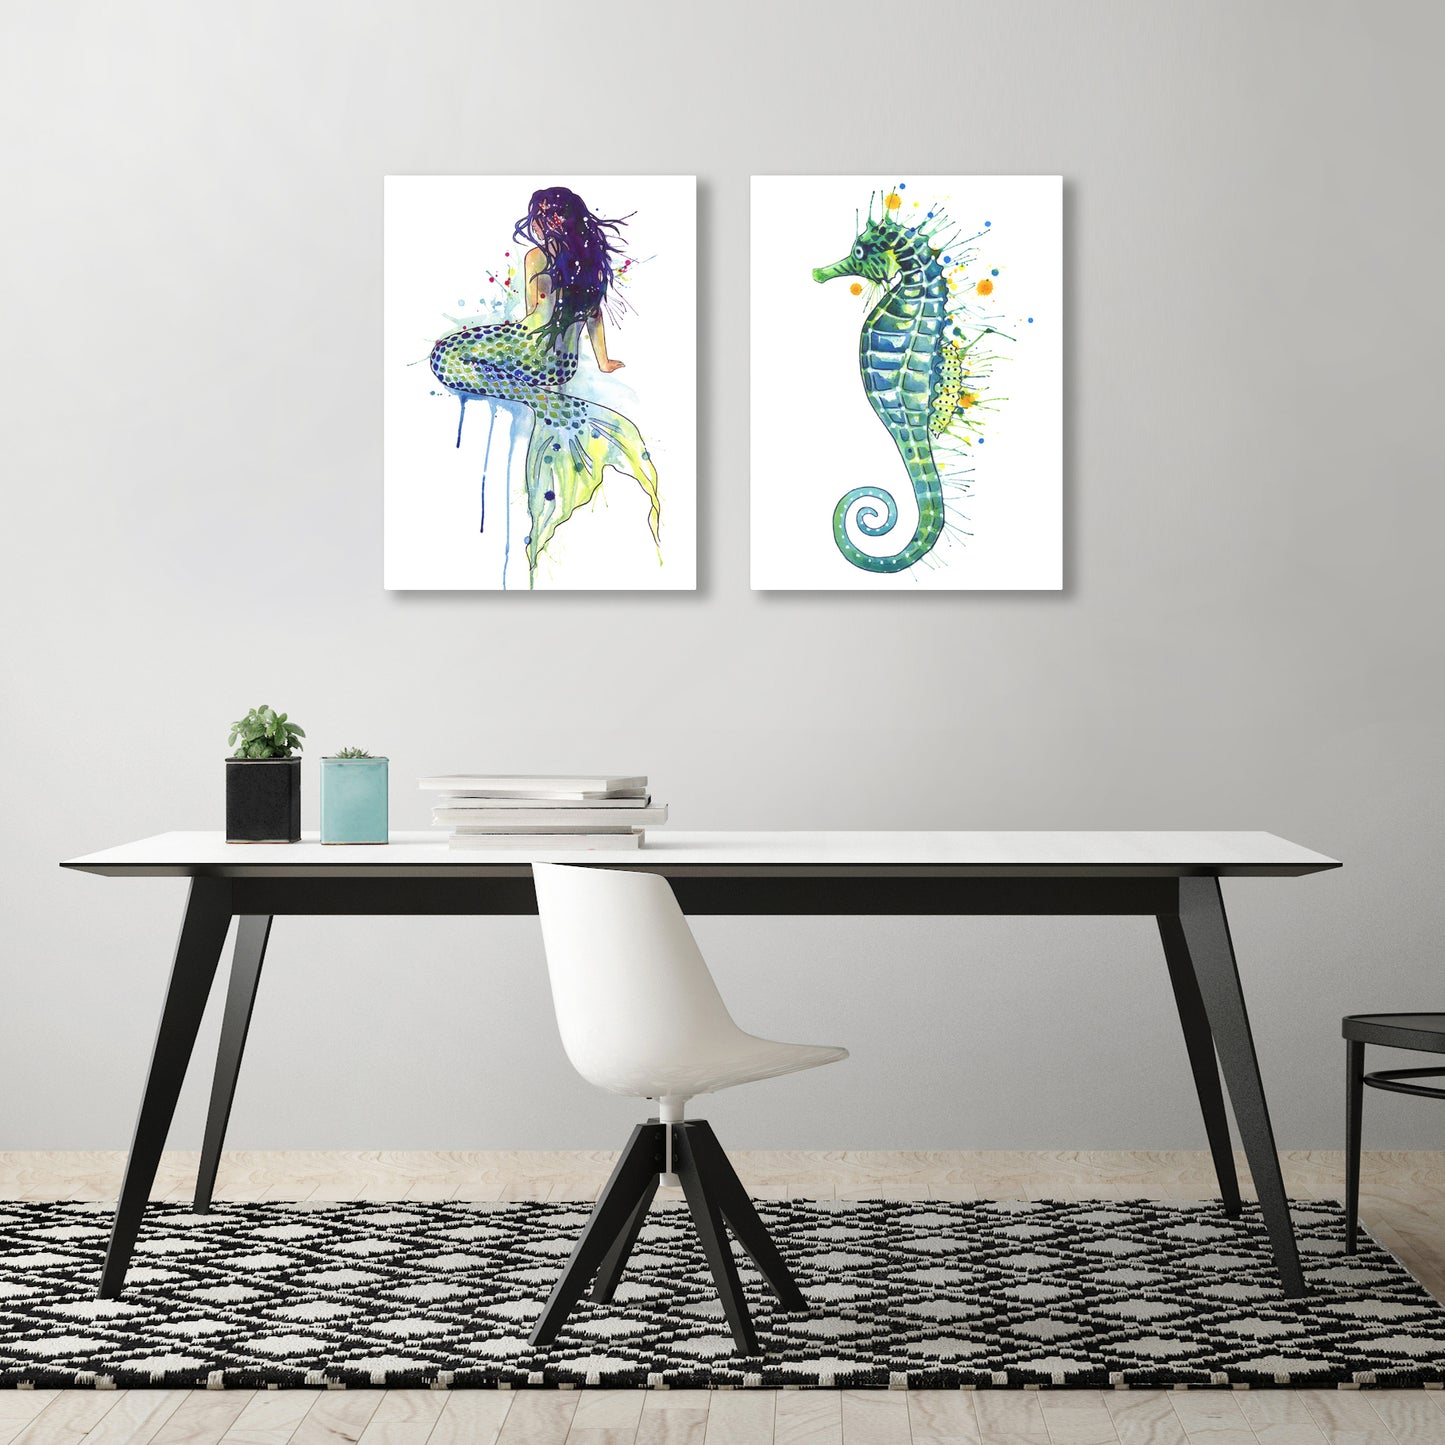 Mermaid by Sam Nagel - 2 Piece Gallery Wrapped Canvas Set - Art Set - Americanflat